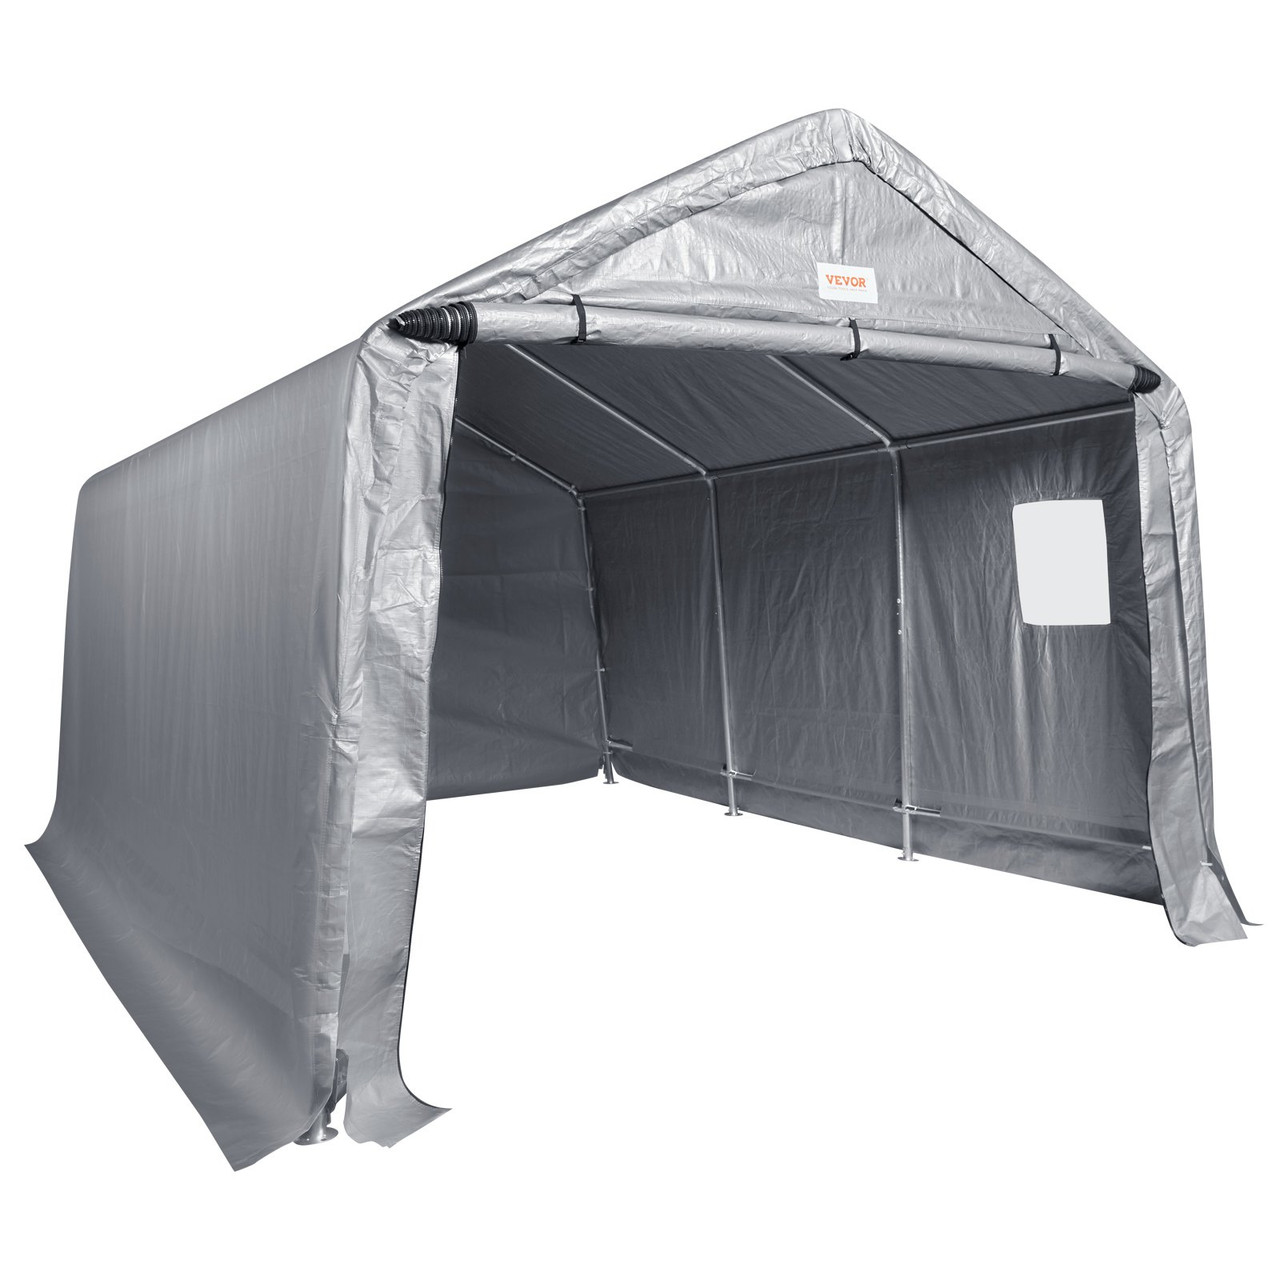 Outdoor Portable Storage Shelter Shed, 10x15x8ft Heavy Duty All-Season Instant Garage Tent Canopy Carport with Roll-up Zipper Door and Ventilated Windows For Cars, Motorcycle, Bike, Garden Tools